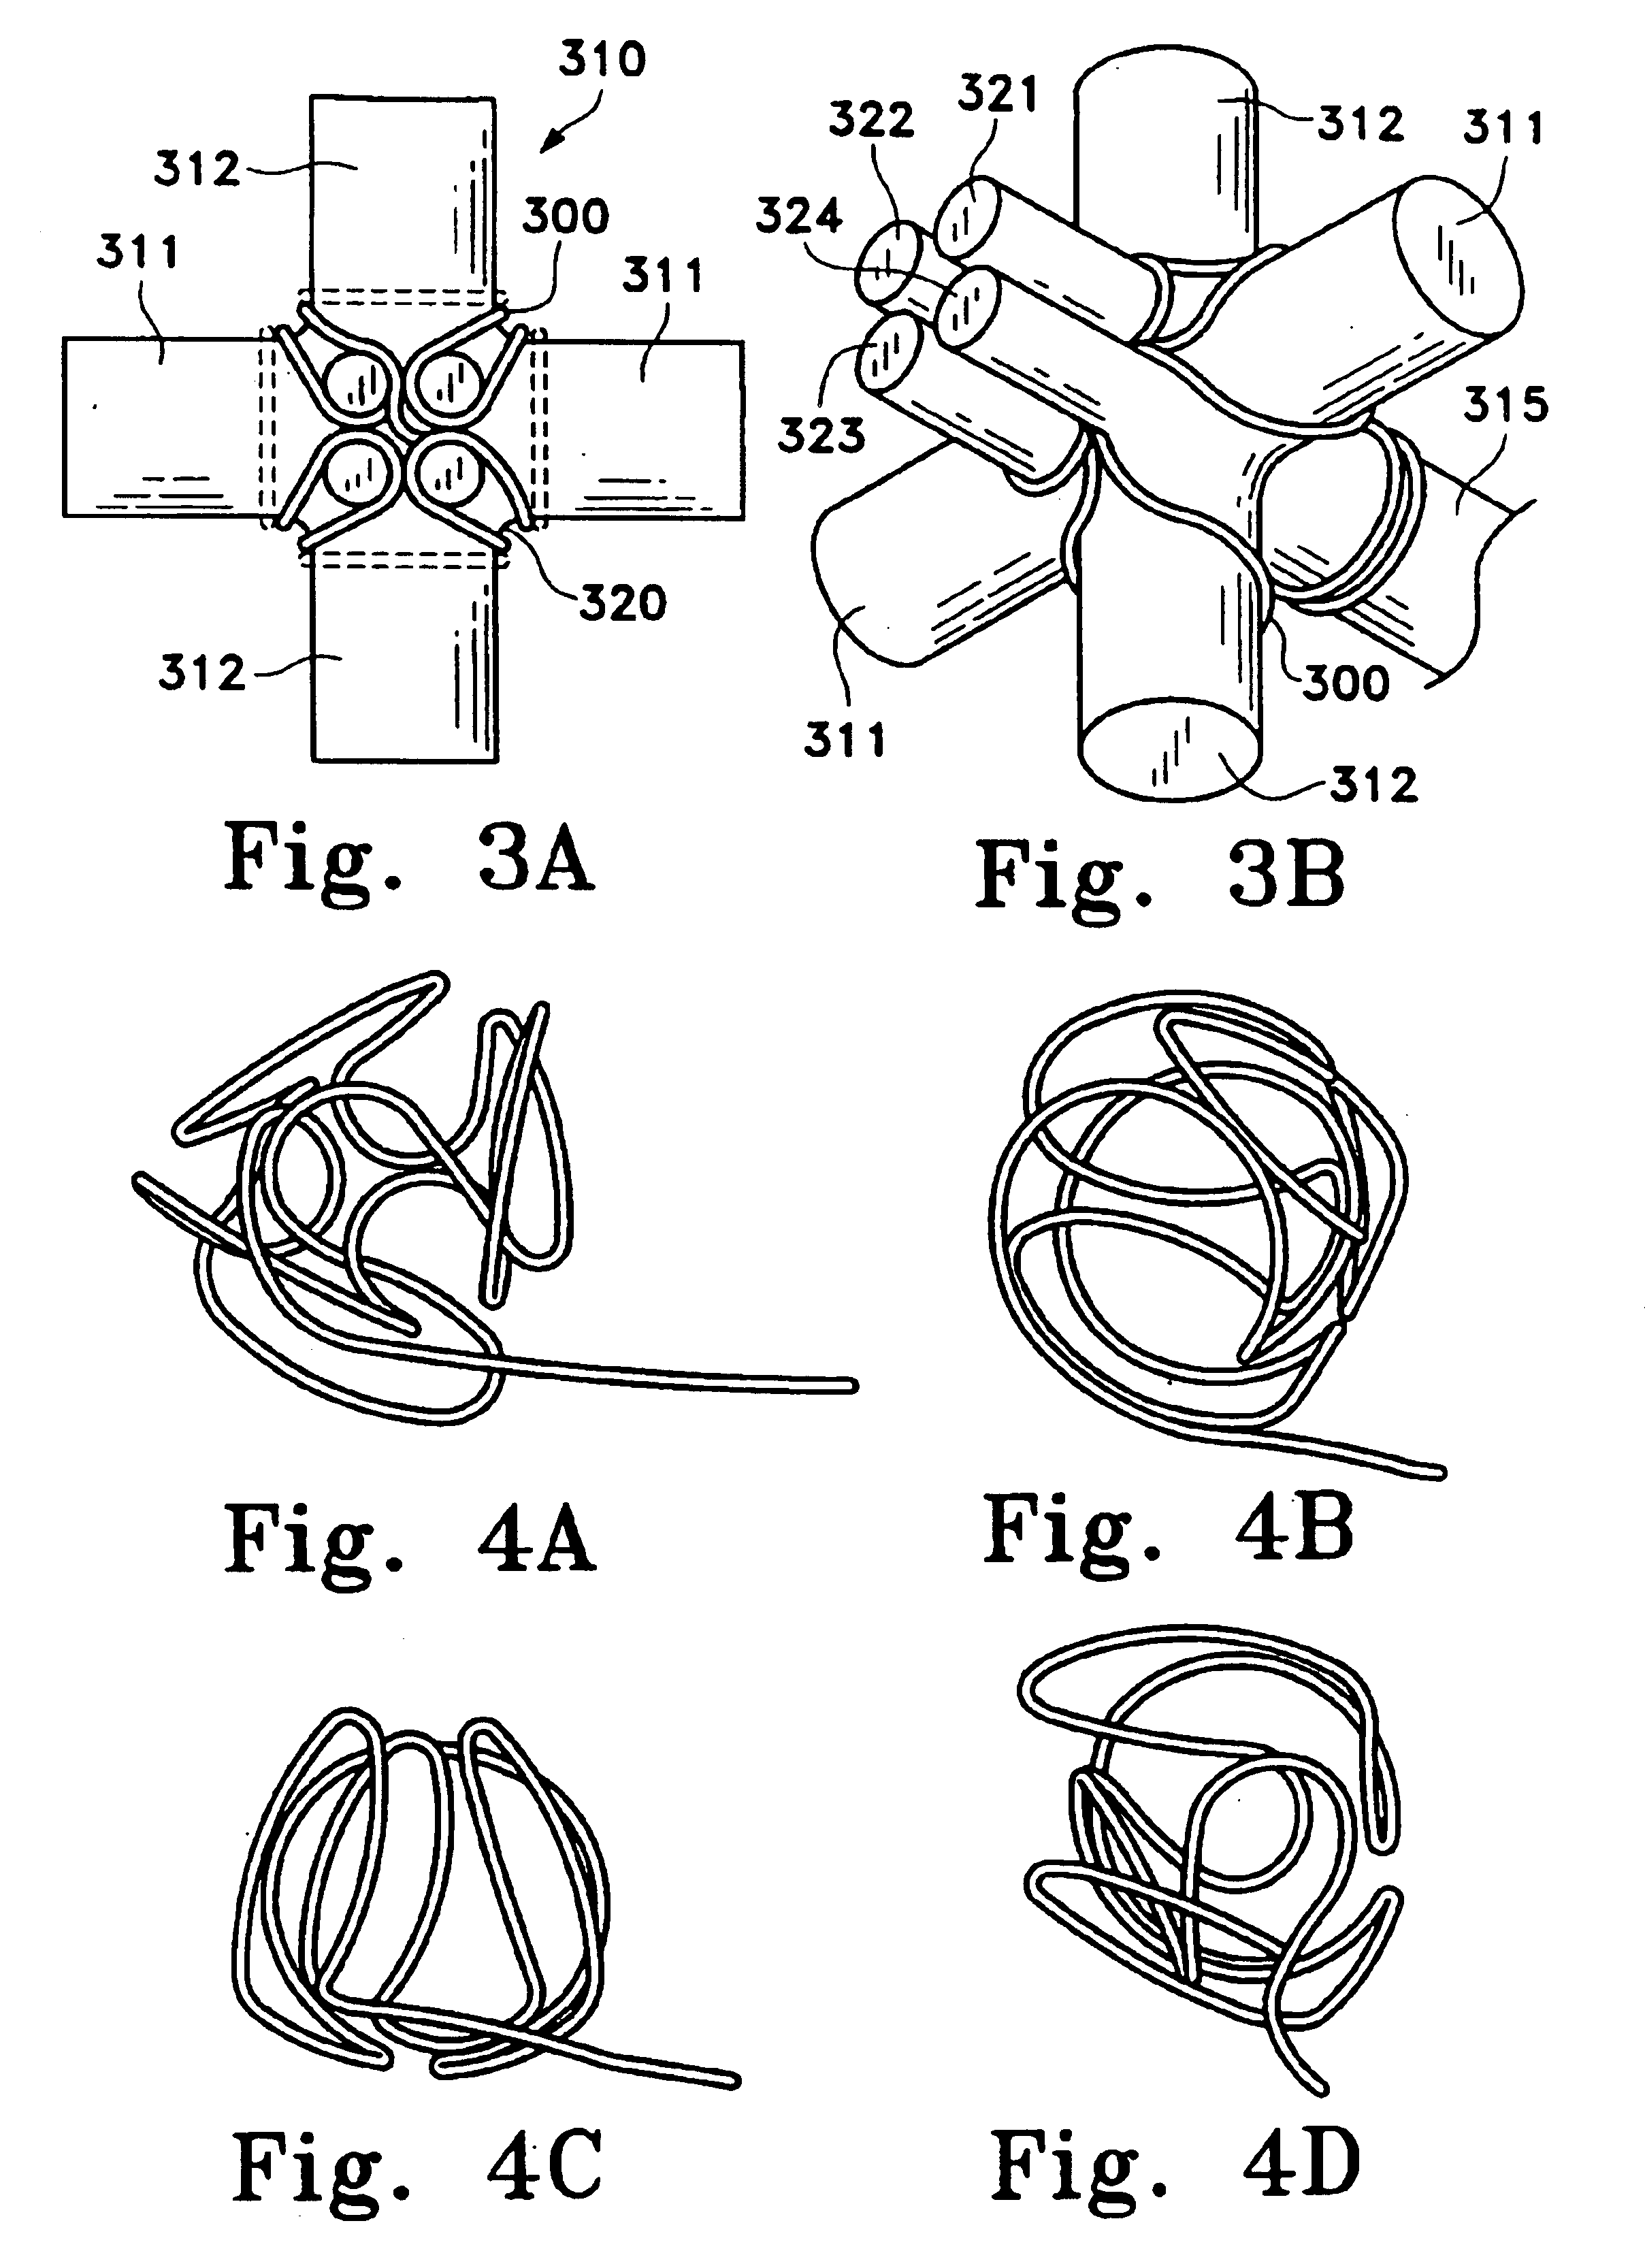 Stable coil designs